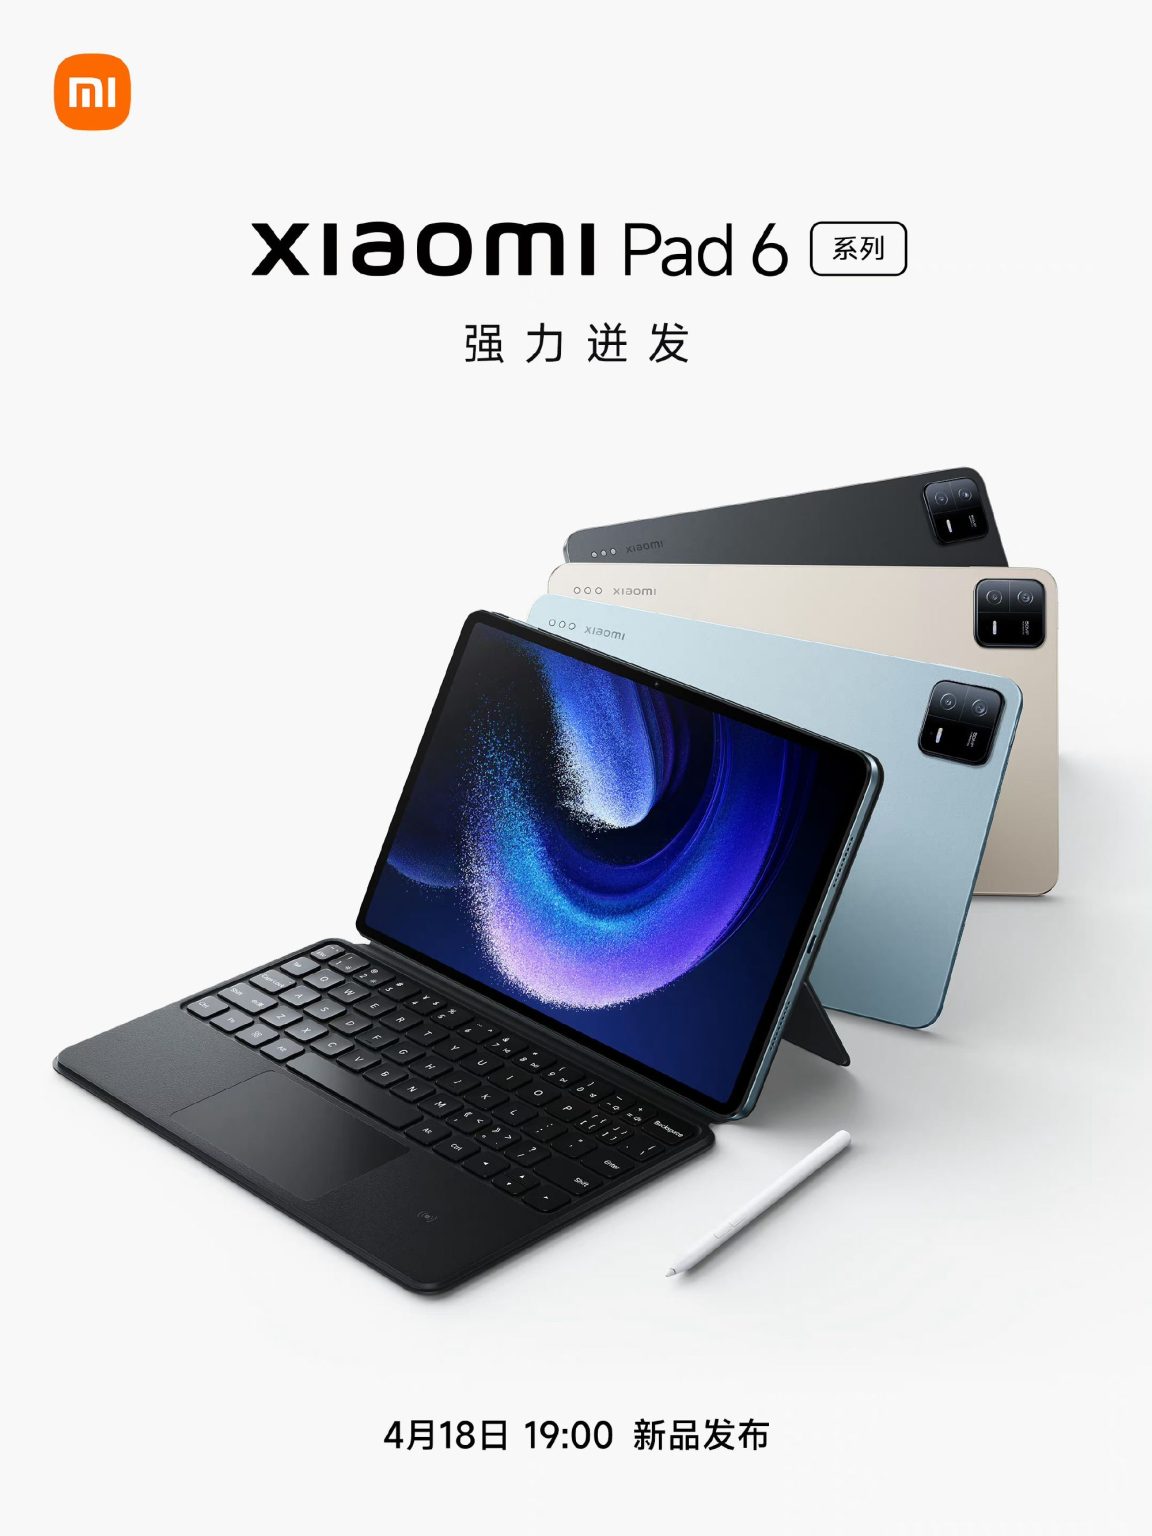 Xiaomi Pad 6 Pro Spotted On Geekbench Ahead Of April 18 Launch Gizmochina 3972